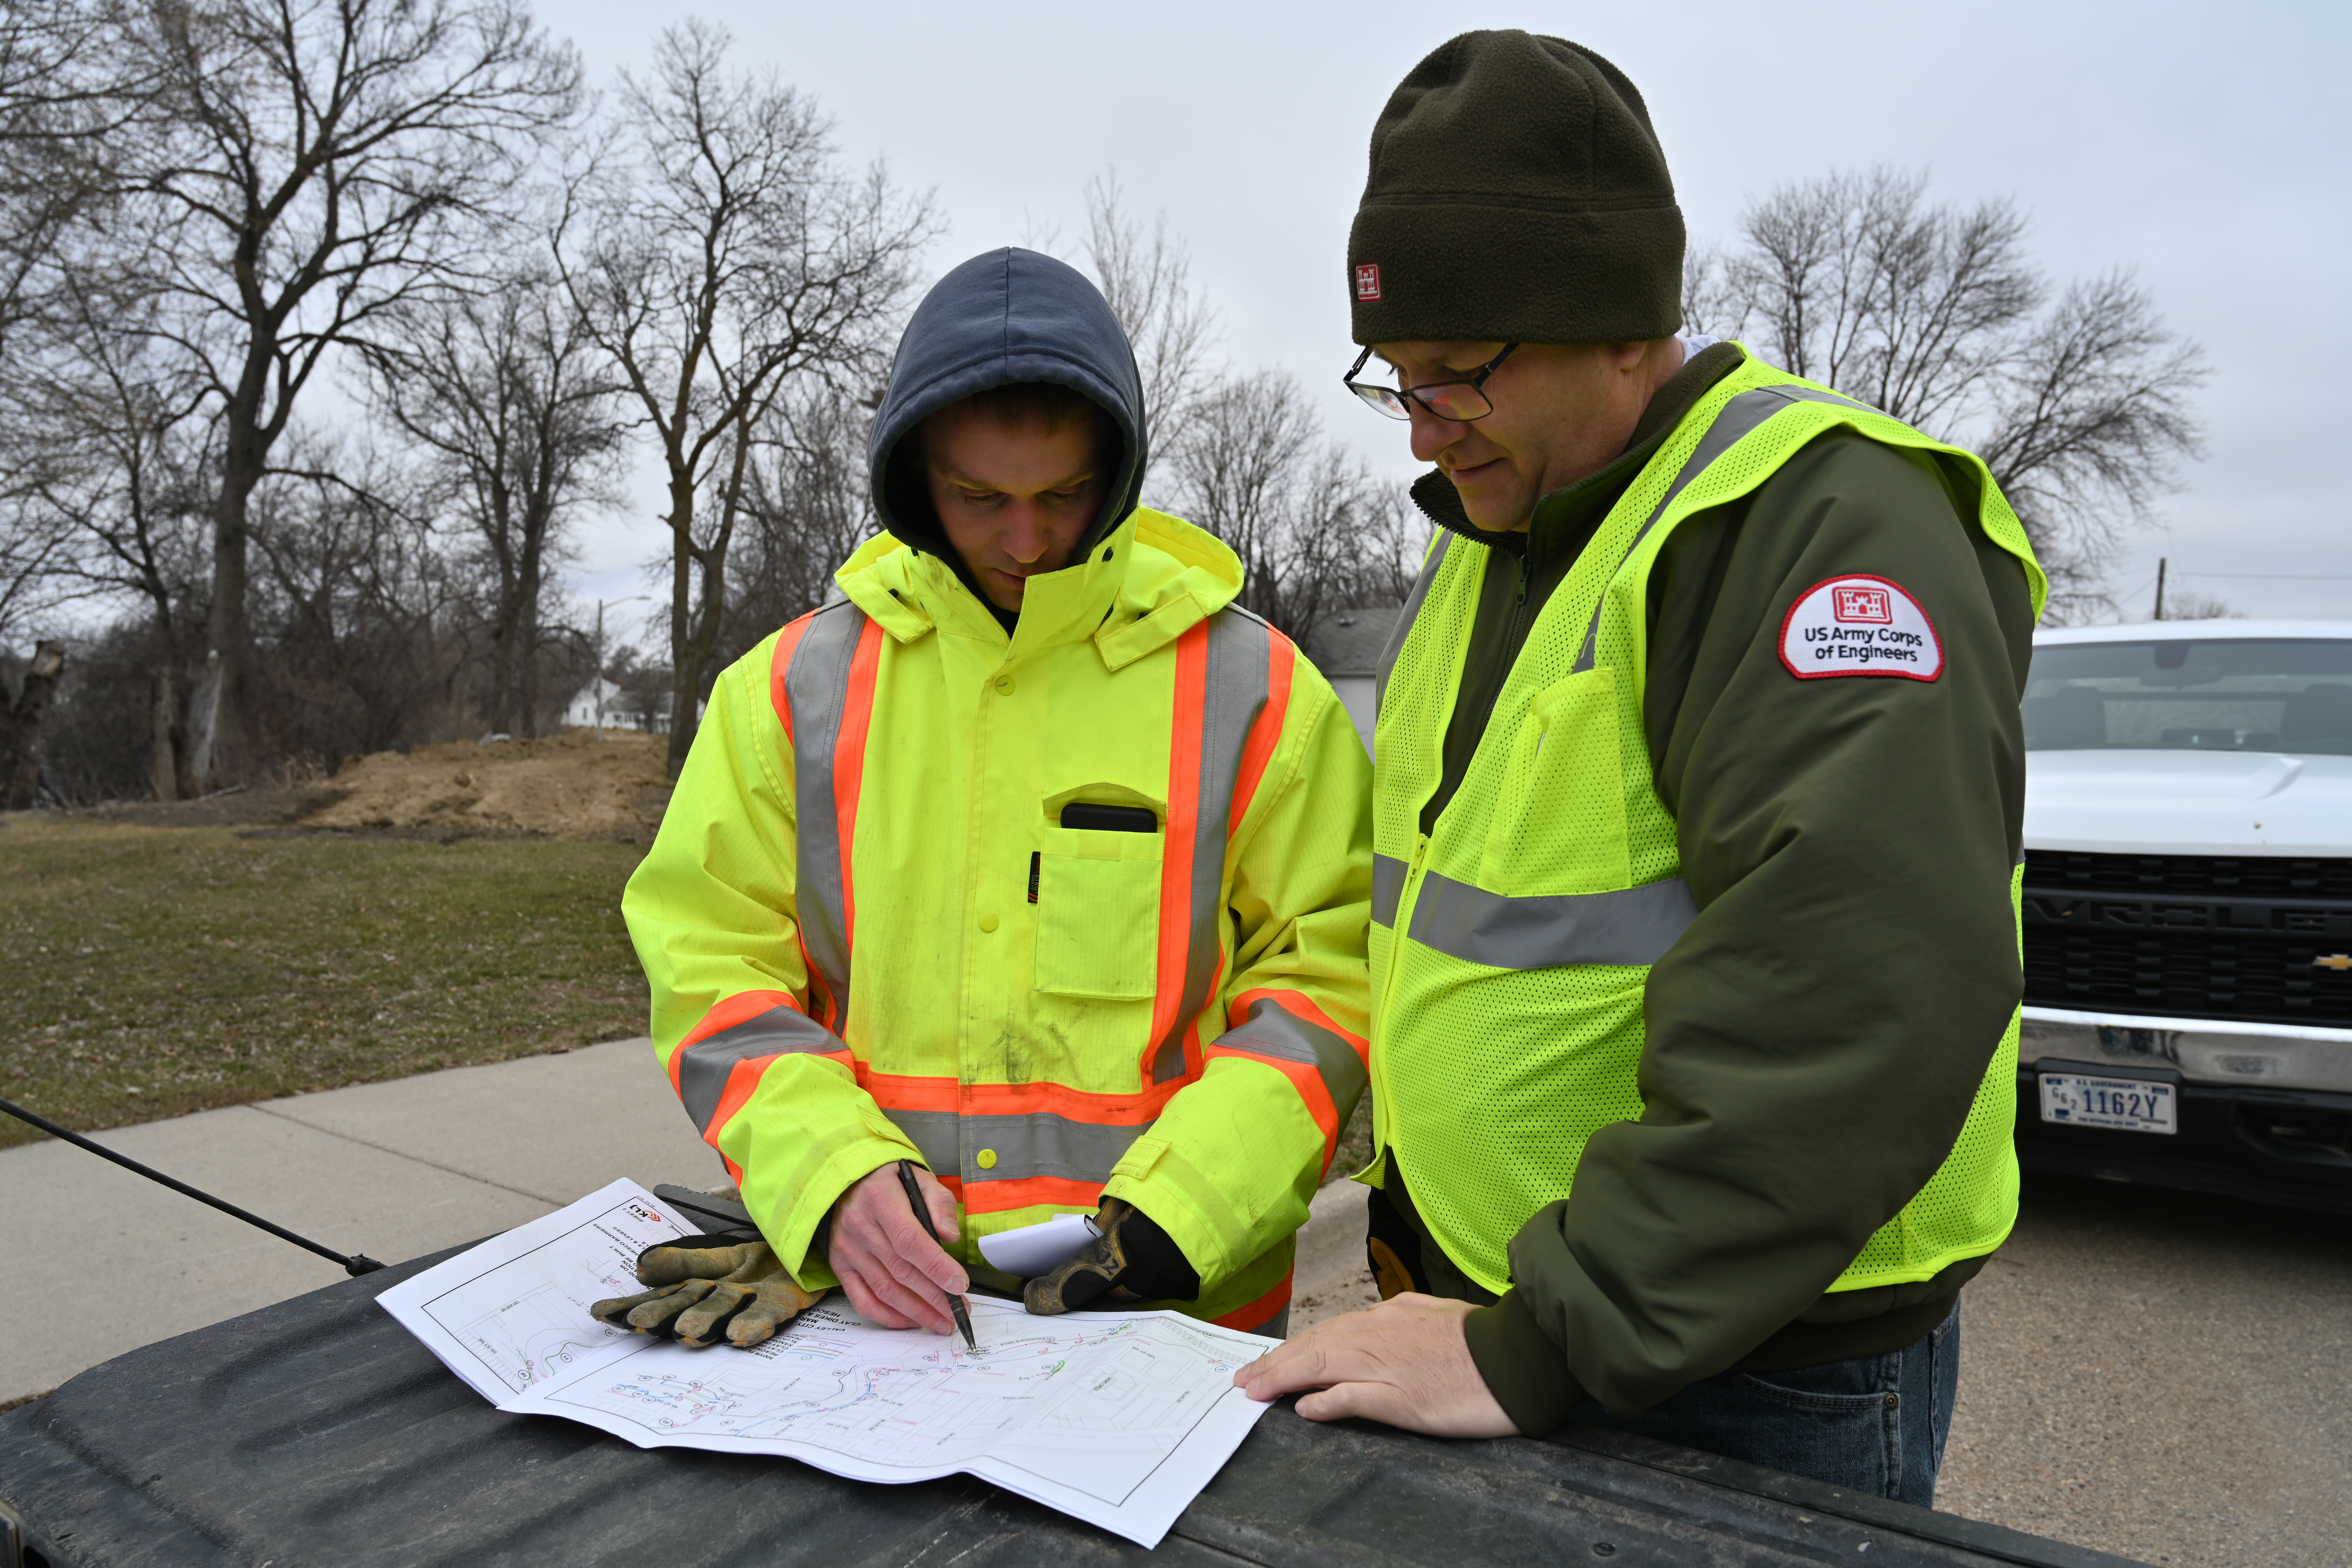 Two men in reflective vests stand outside looking at a large piece of paper